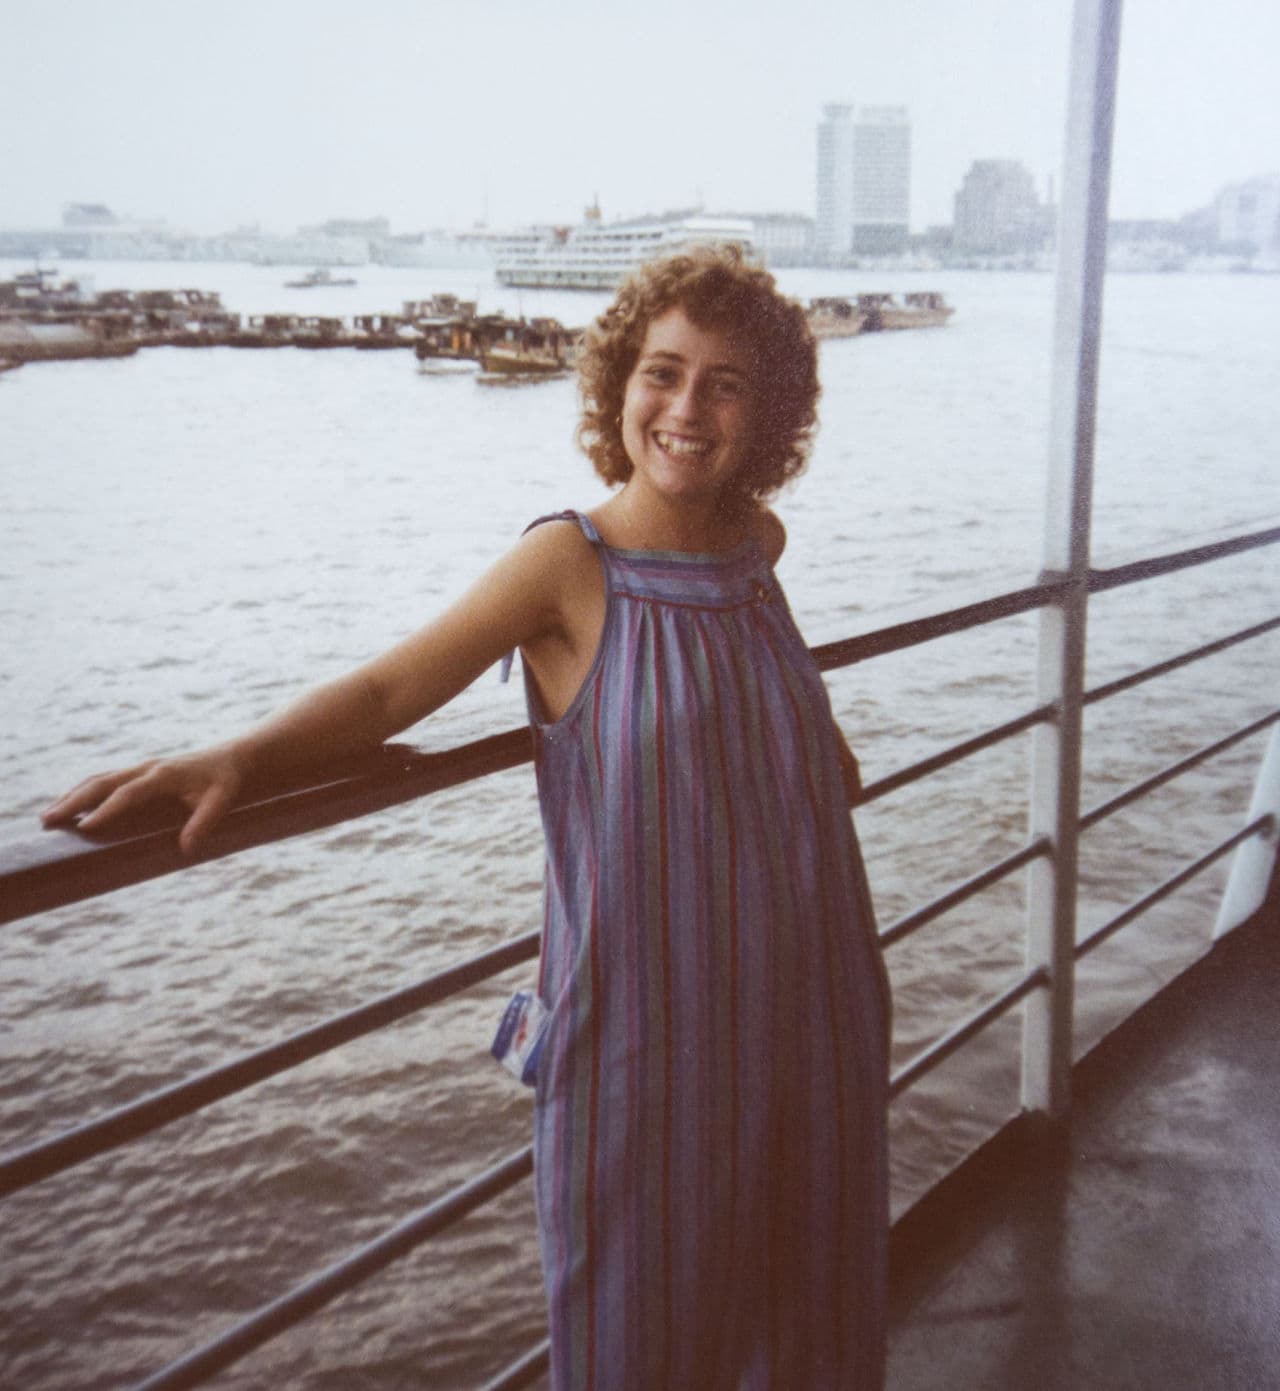 Caroline Reeves on a Huangpu River Cruise in June of 1986, shortly after this story took place. (Courtesy of Caroline Reeves)